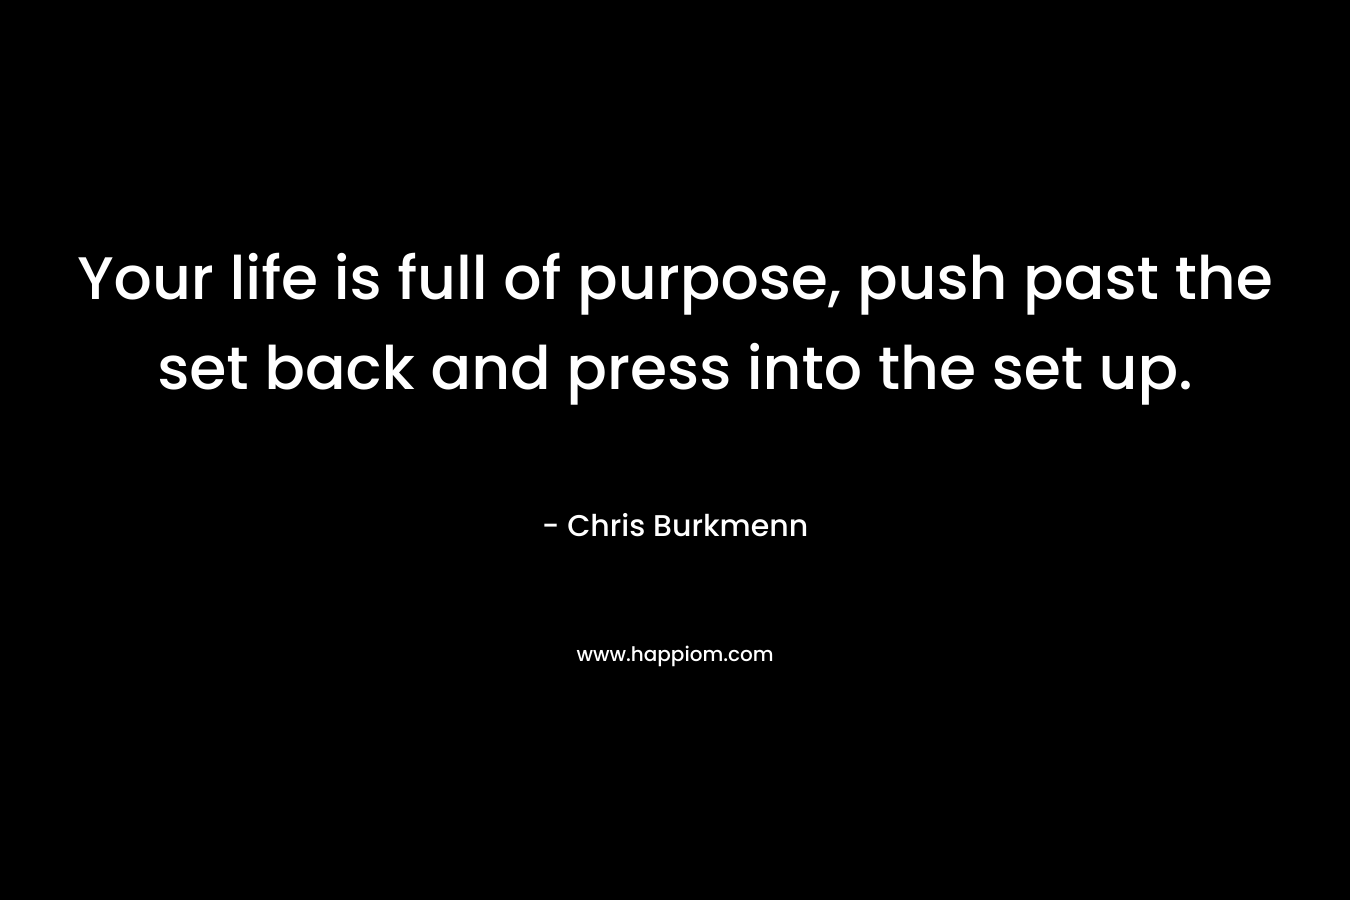 Your life is full of purpose, push past the set back and press into the set up.